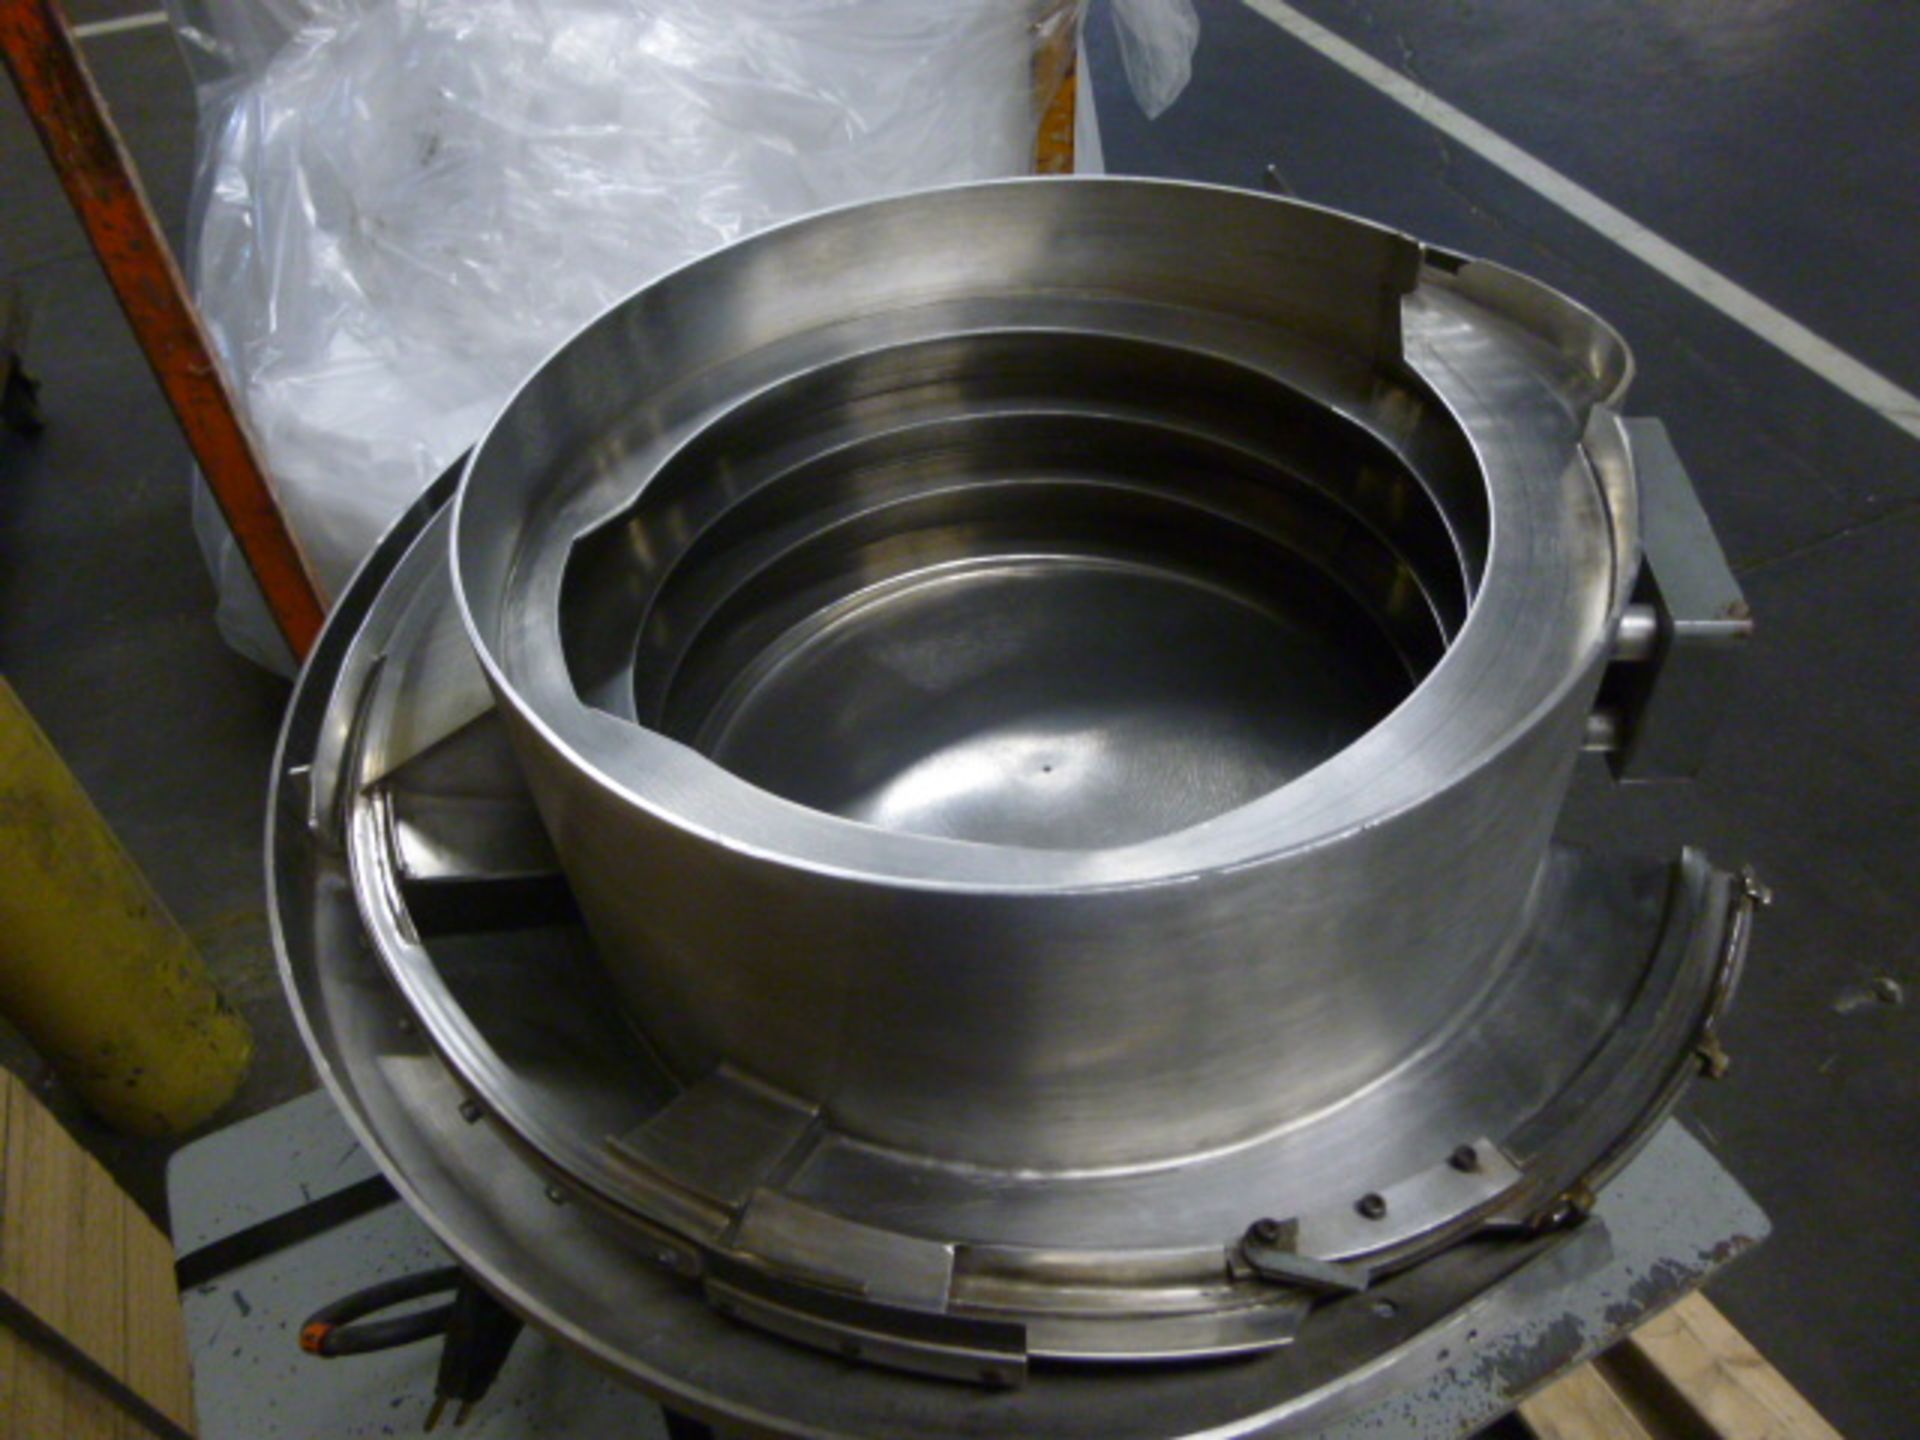 Vibrating bowl Coates industrial brand Model: 8673 115Volts 60 HZ Item Location: Montreal - Image 3 of 3